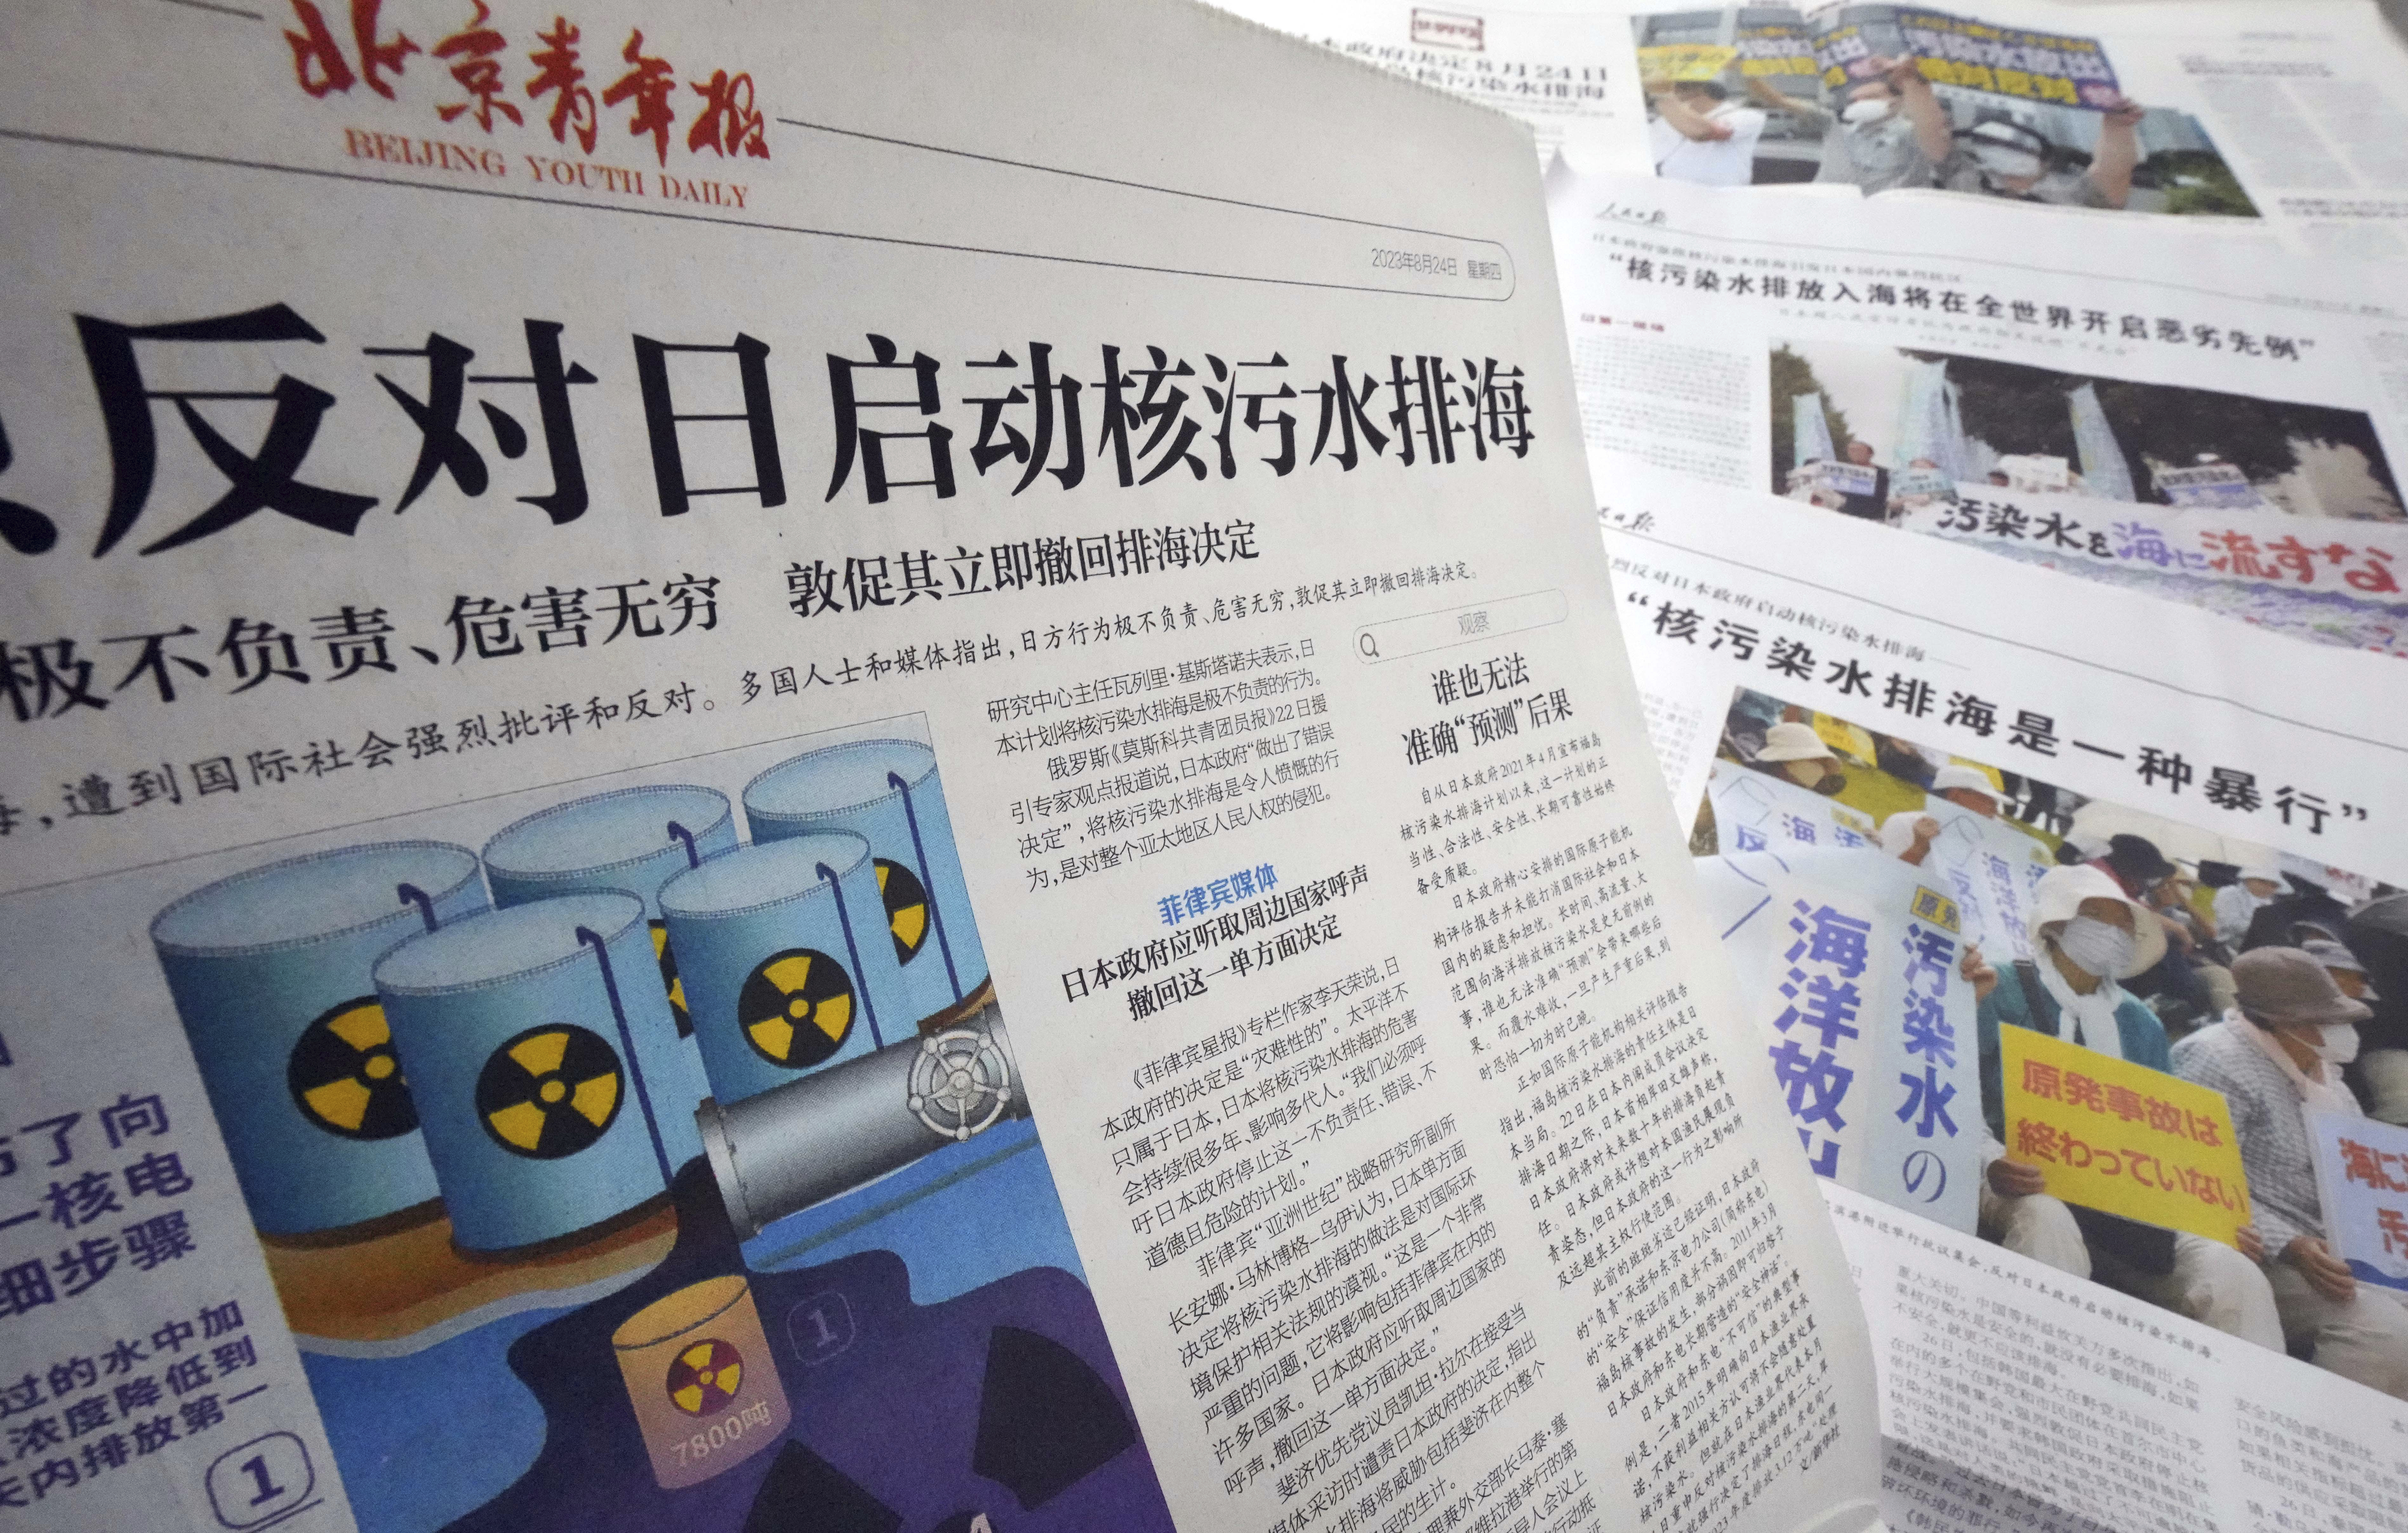 China’s Concern About Nuclear Wastewater May Be More About Politics Than Science